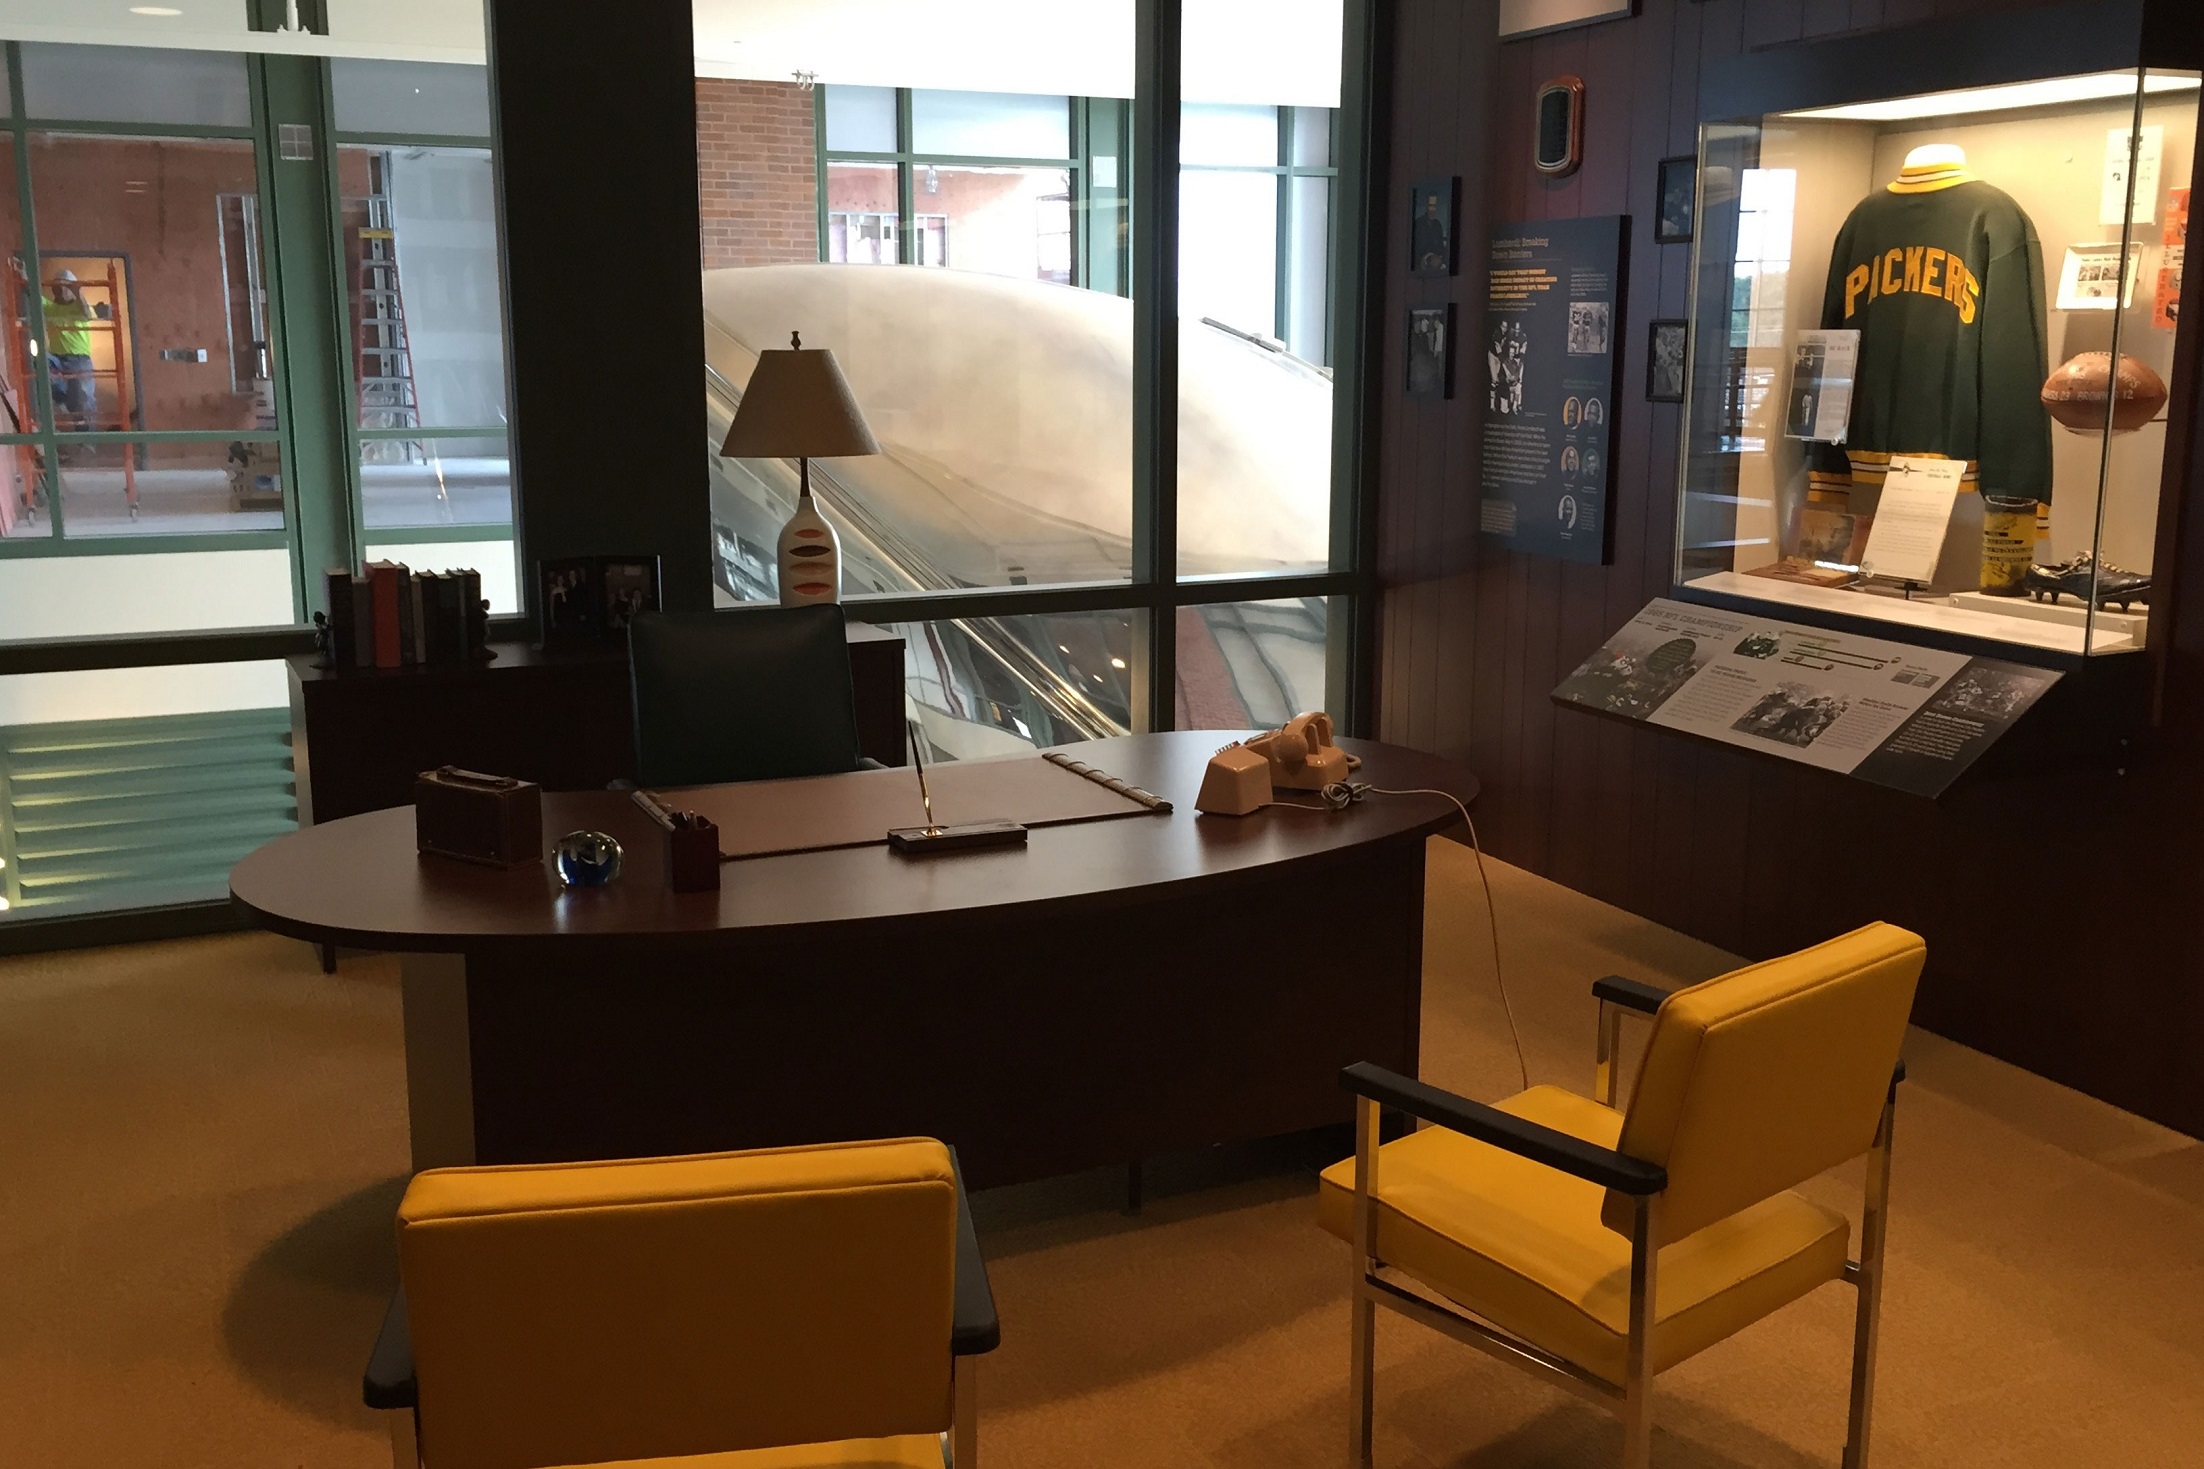 Photo of the Lombardi Office Exhibit in the Hall of Fame